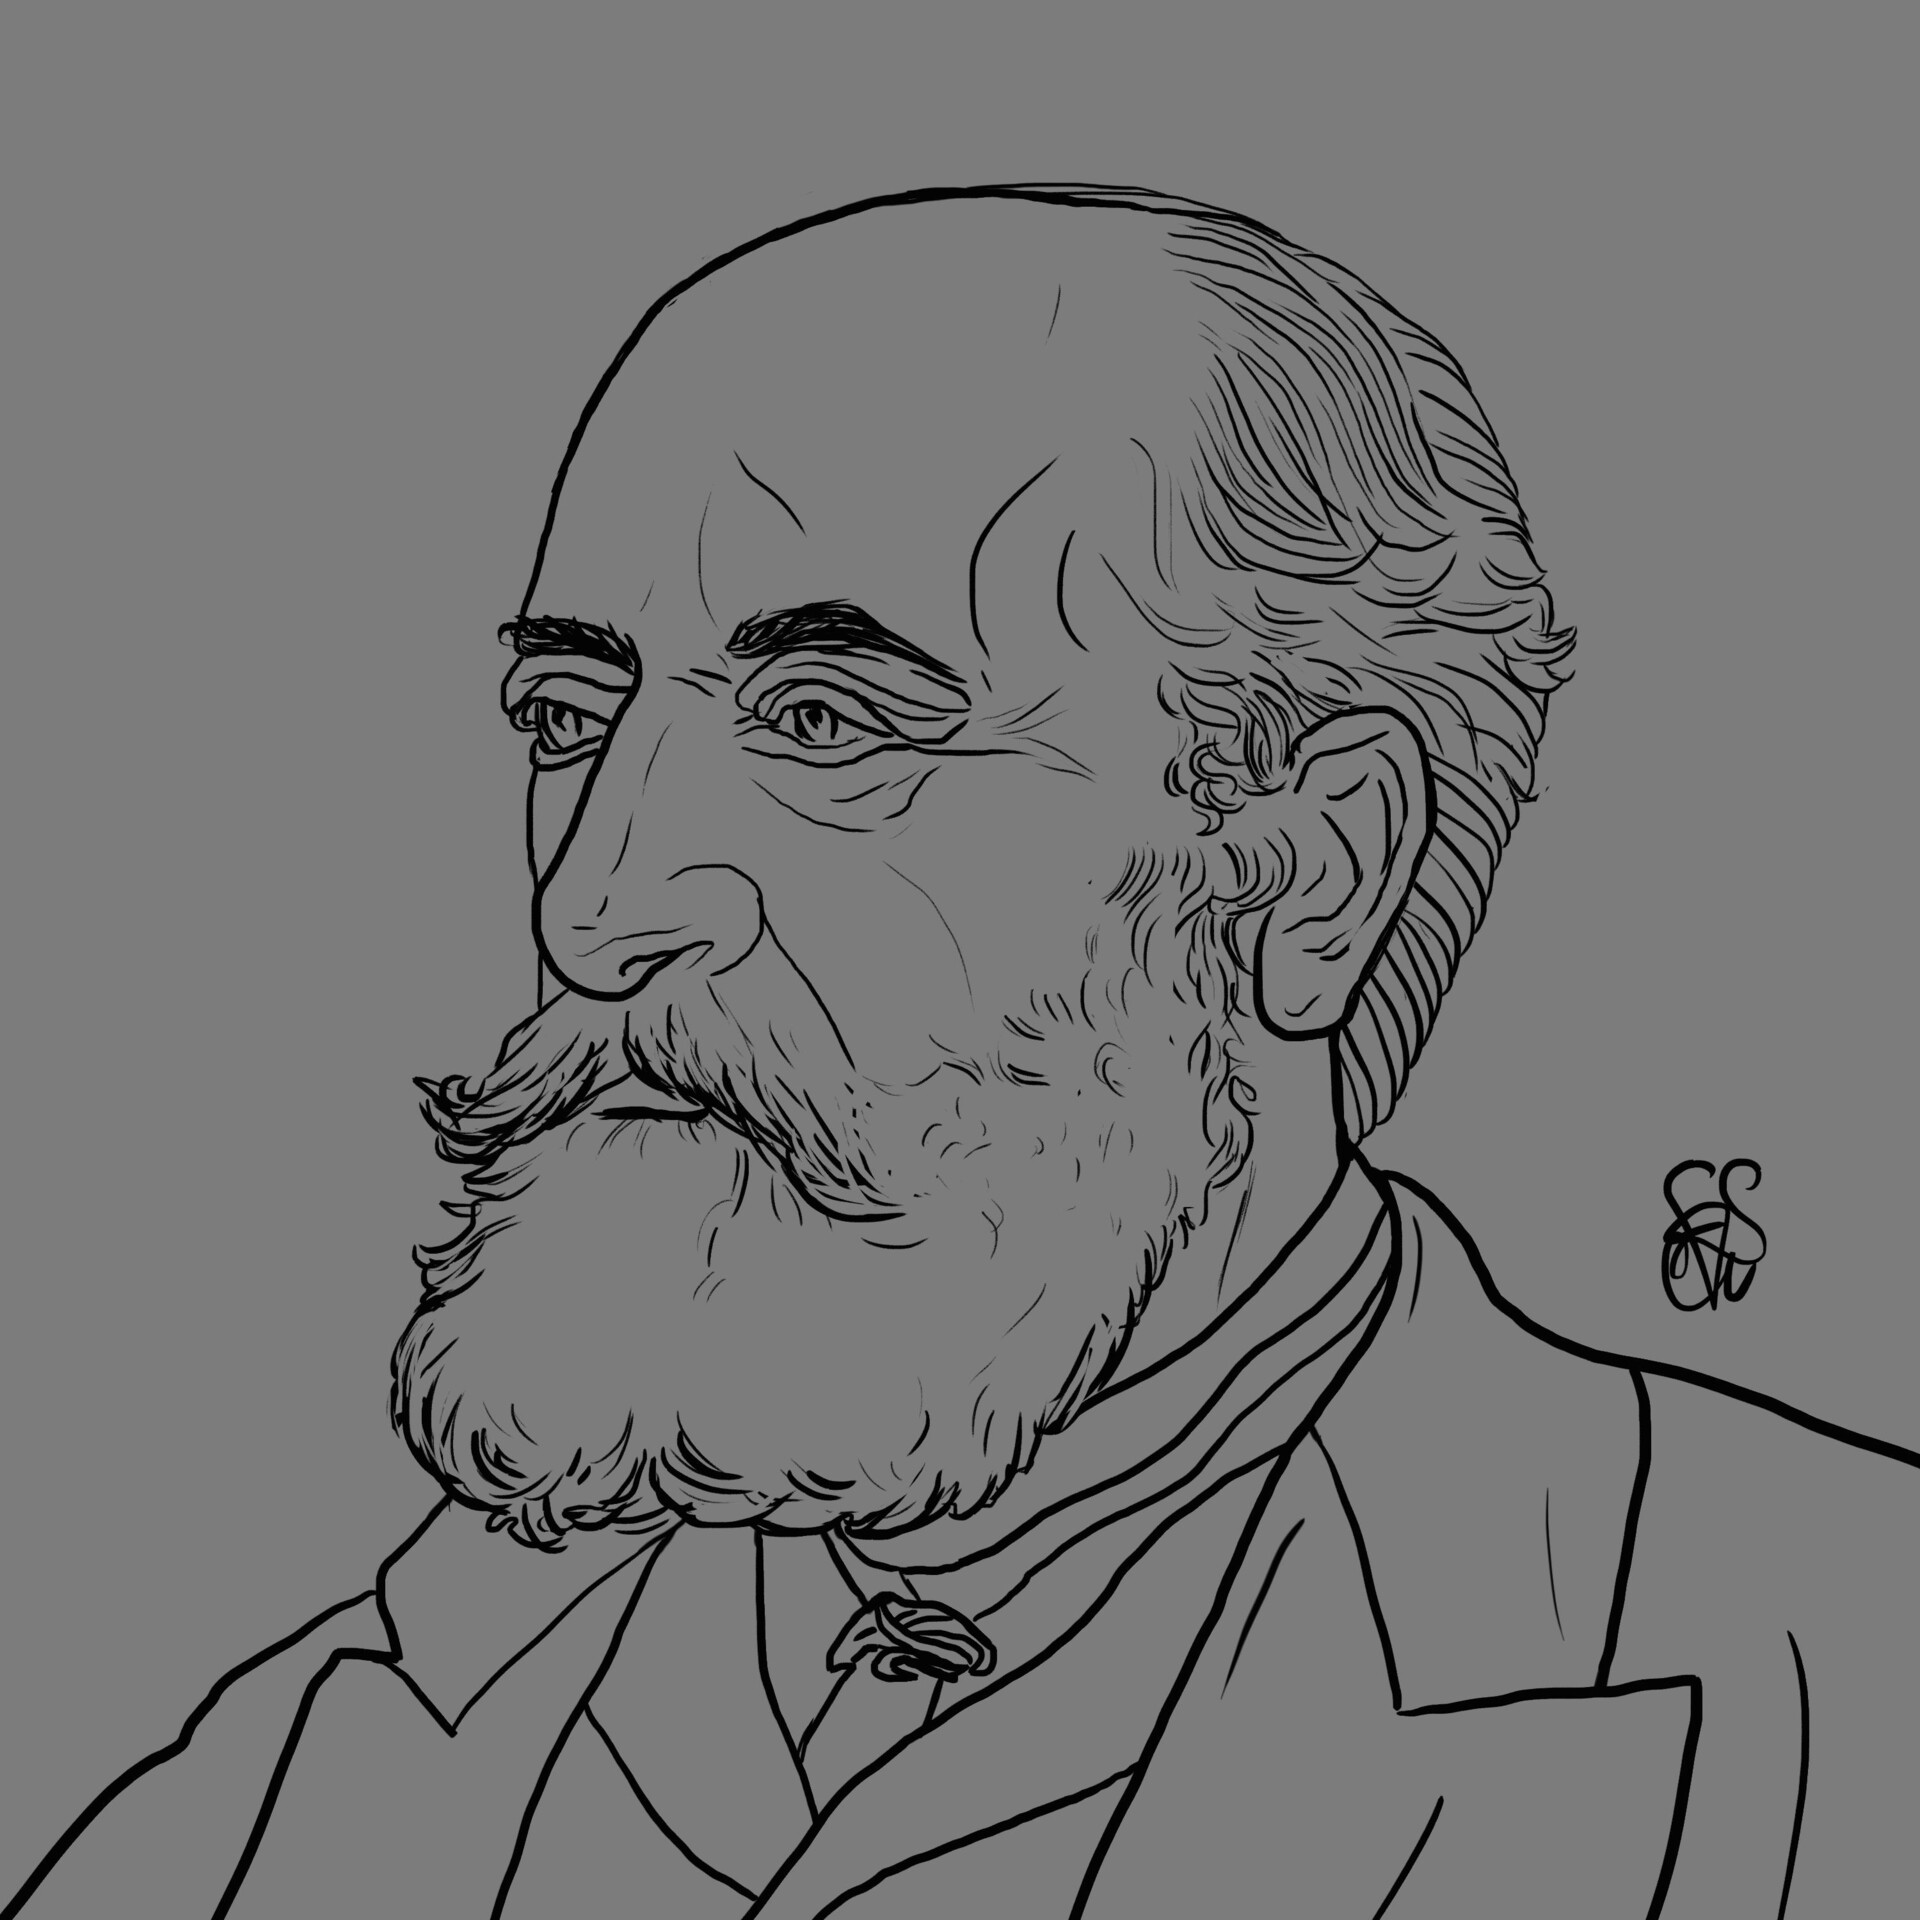 Portrait of Charles Camille Saint-Saëns (1835 - 1921) - The Online Portrait  Gallery